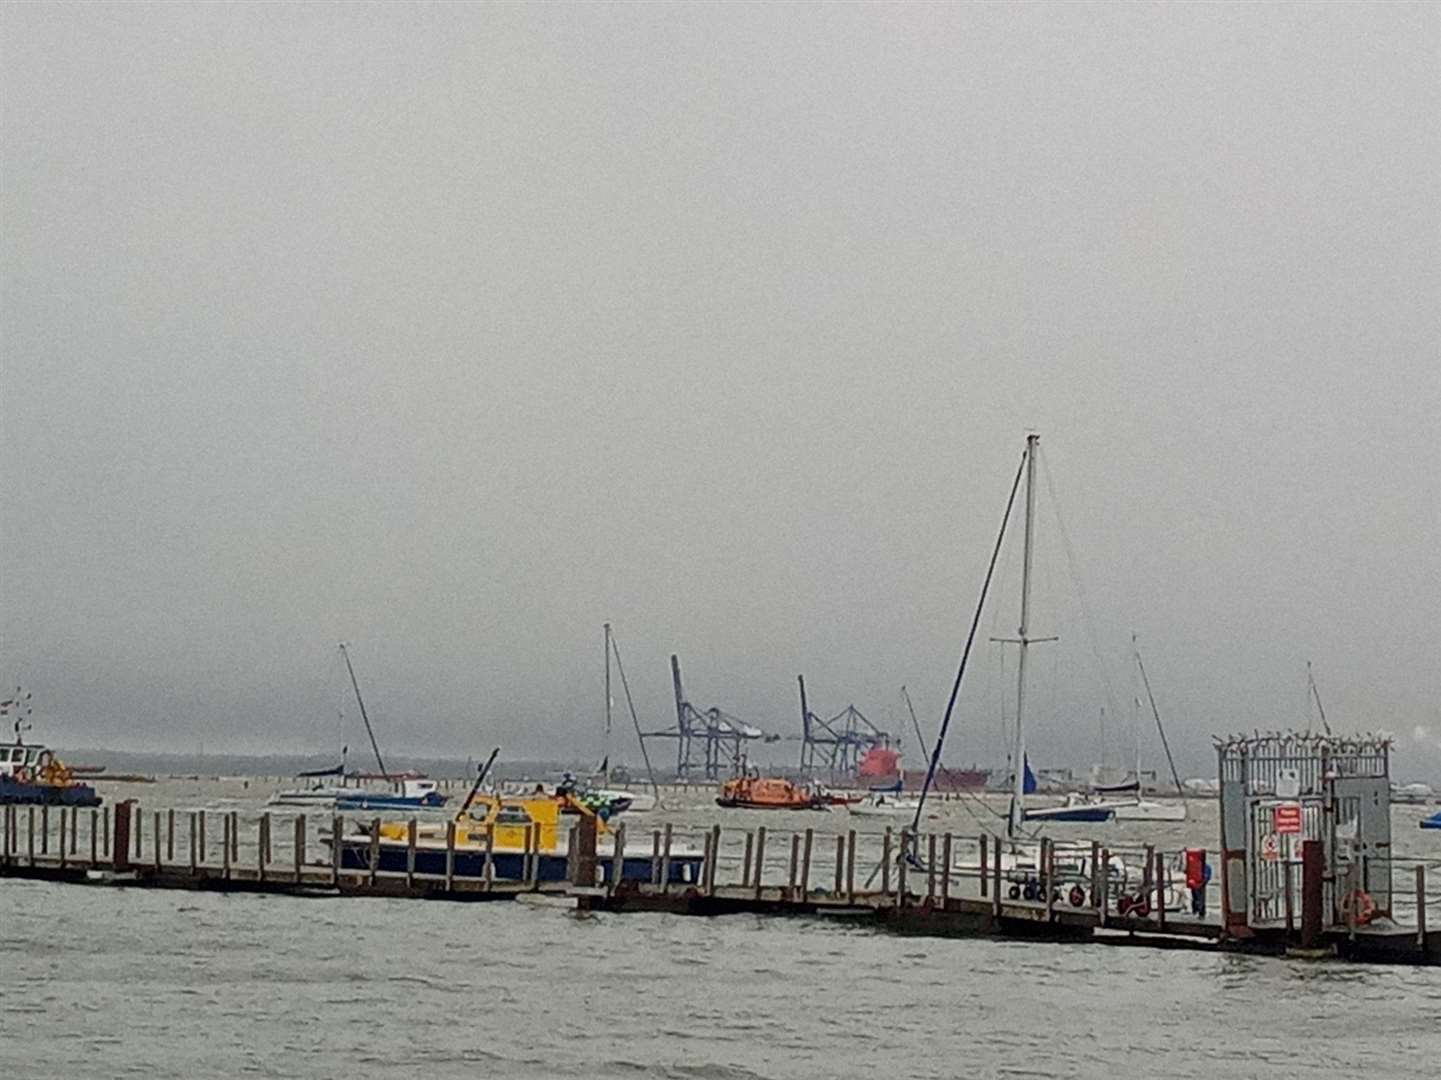 Emergency services are at Crundall's Wharf, Queenborough. Picture: Steve Harding